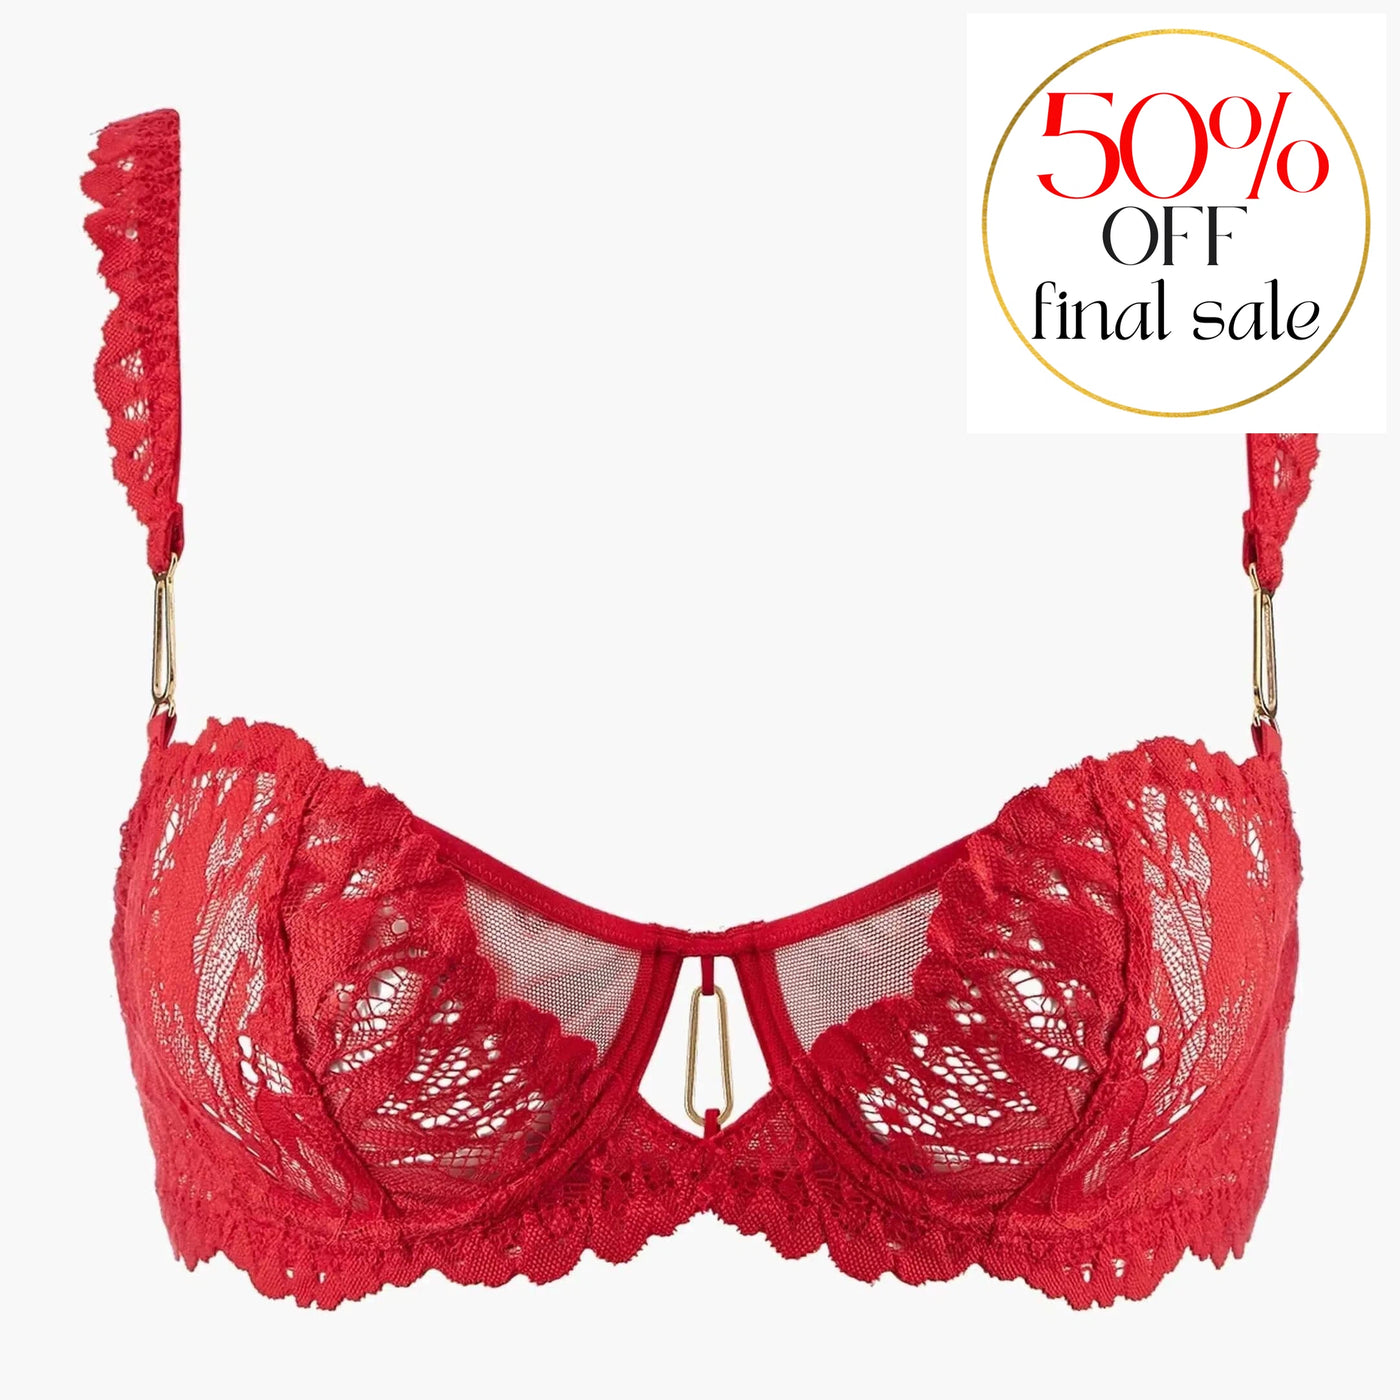 Aubade Flowermania Half Cup Bra in Rouge Floral LAF14-Bras-Aubade-Rouge Floral-32-C-Anna Bella Fine Lingerie, Reveal Your Most Gorgeous Self!